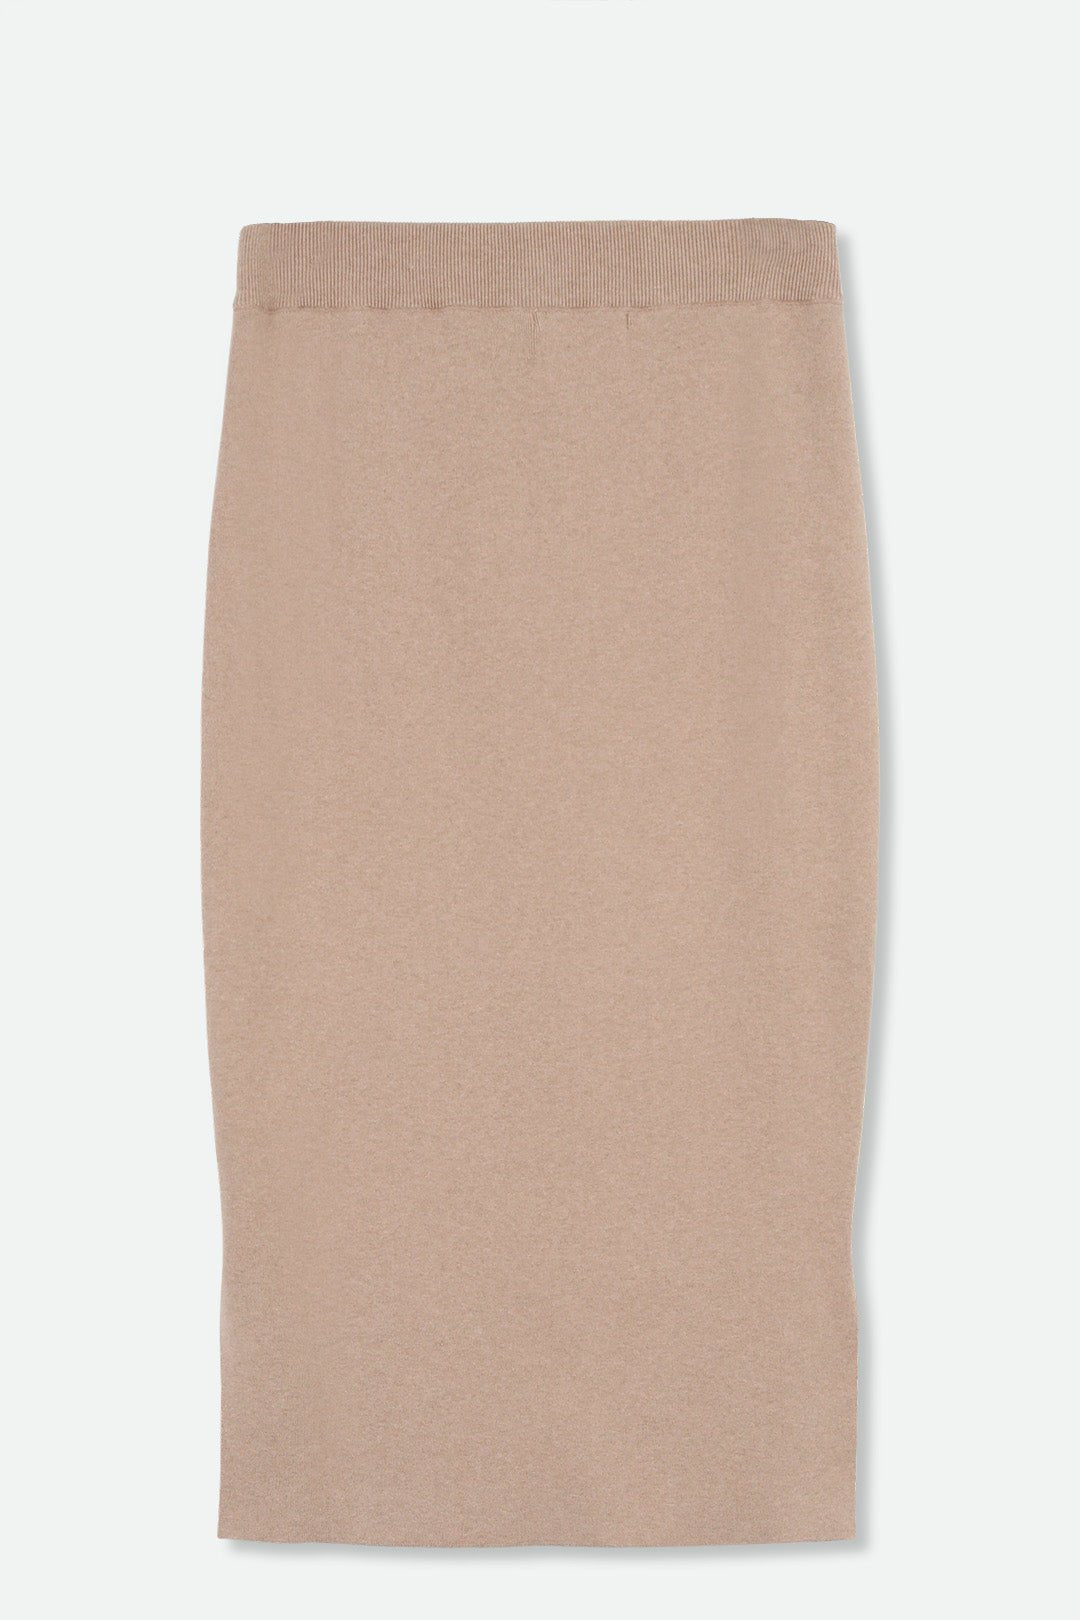 SICILY PENCIL SKIRT IN KNIT PIMA COTTON STRETCH HEATHER NUDE PINK - Jarbo